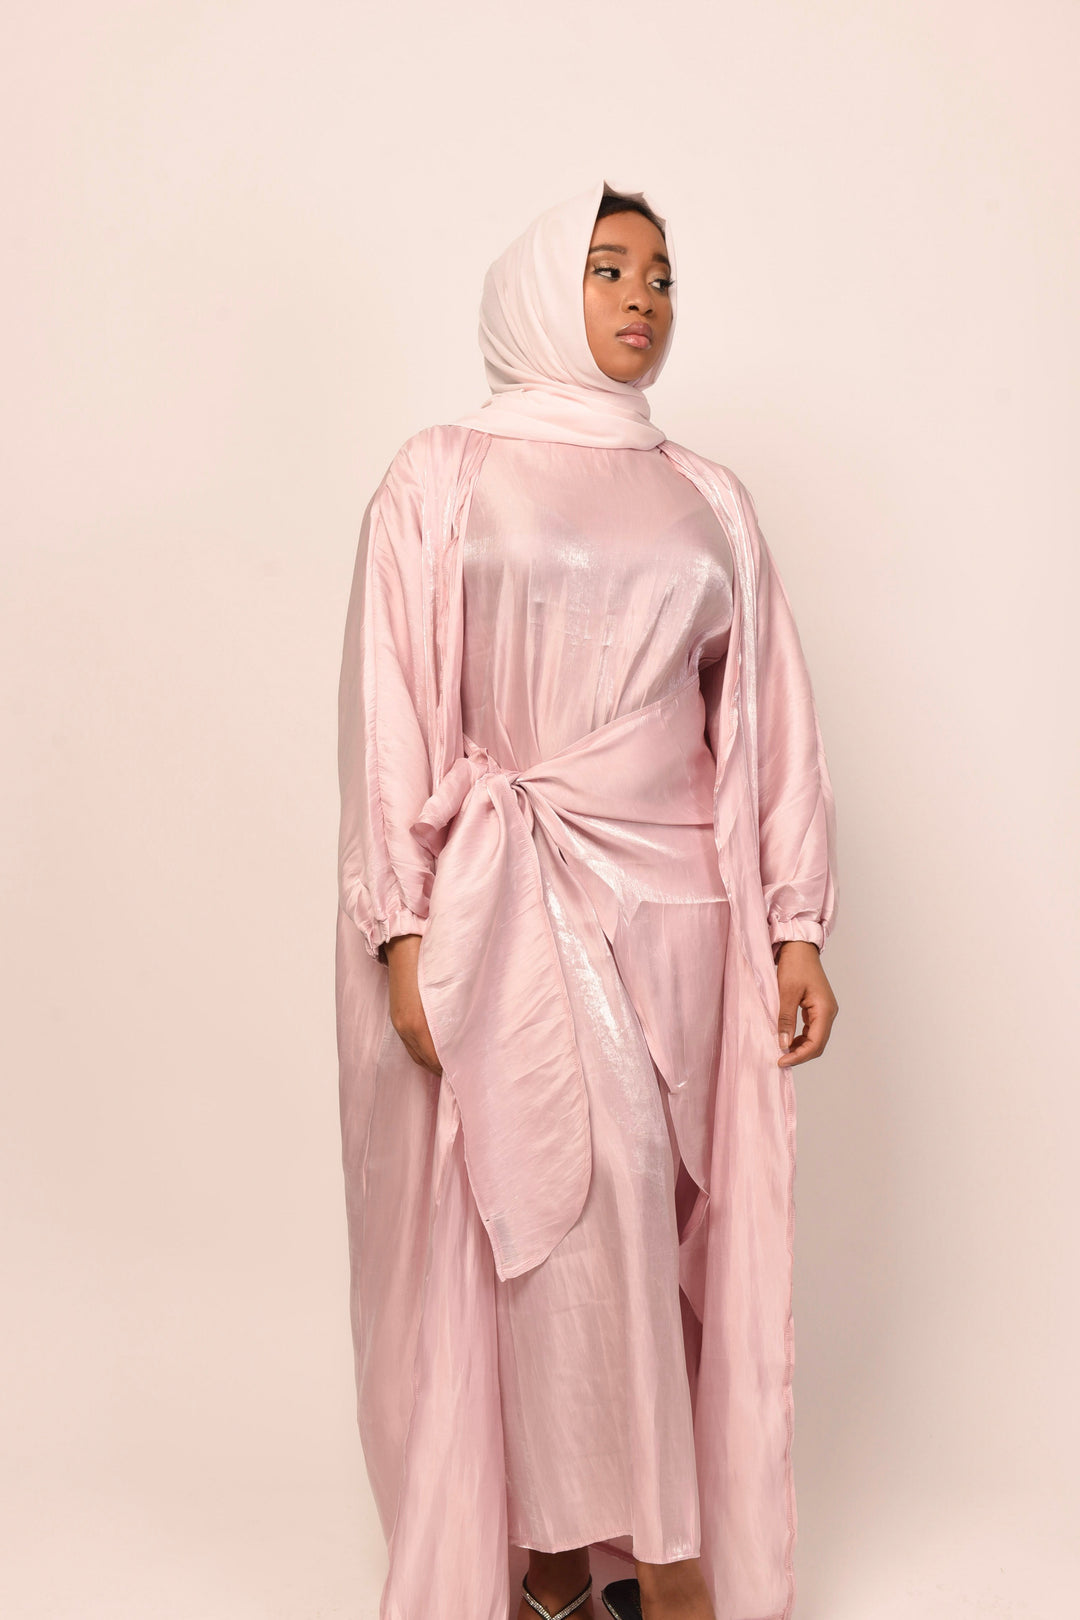 Get trendy with Shimmer 4-Piece Abaya Set - Pink -  available at Voilee NY. Grab yours for $44.90 today!